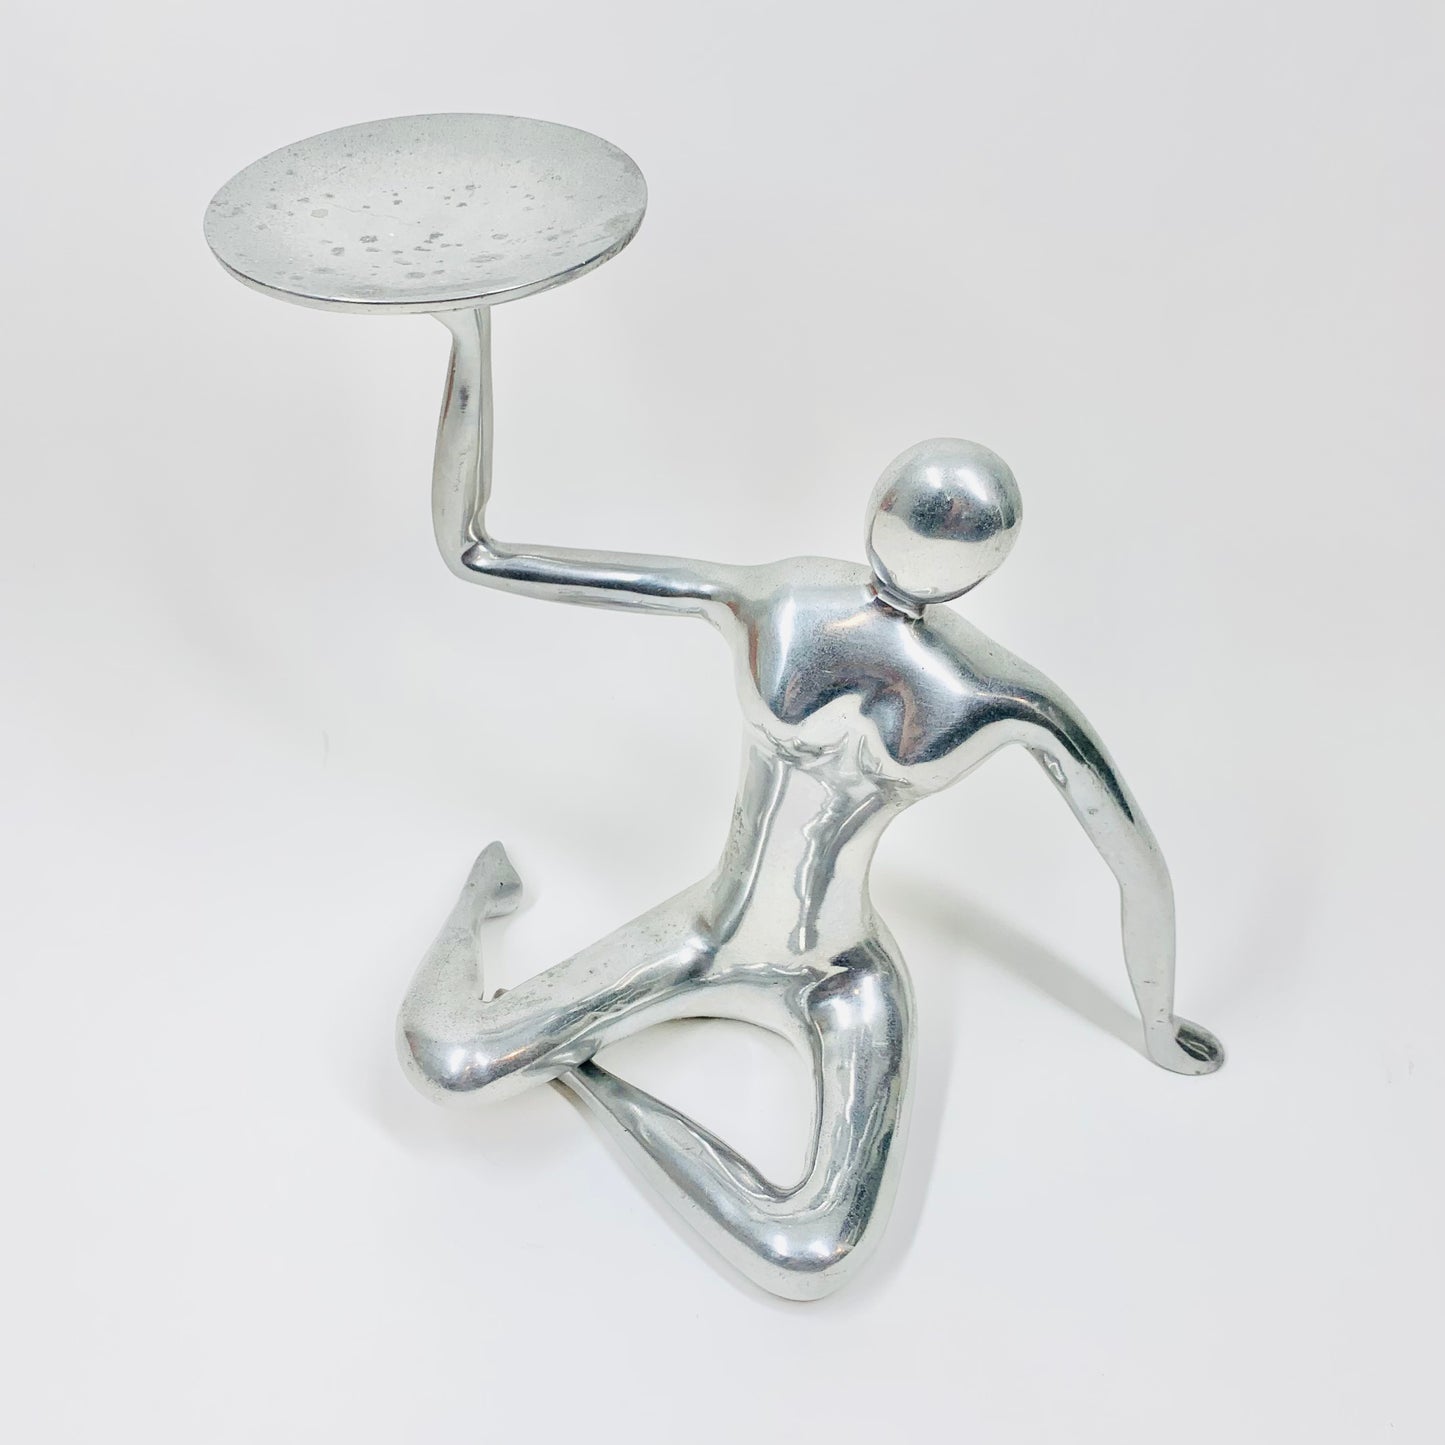 Rare 1980s post-modern chrome steel seated nude sculpture/candle holder